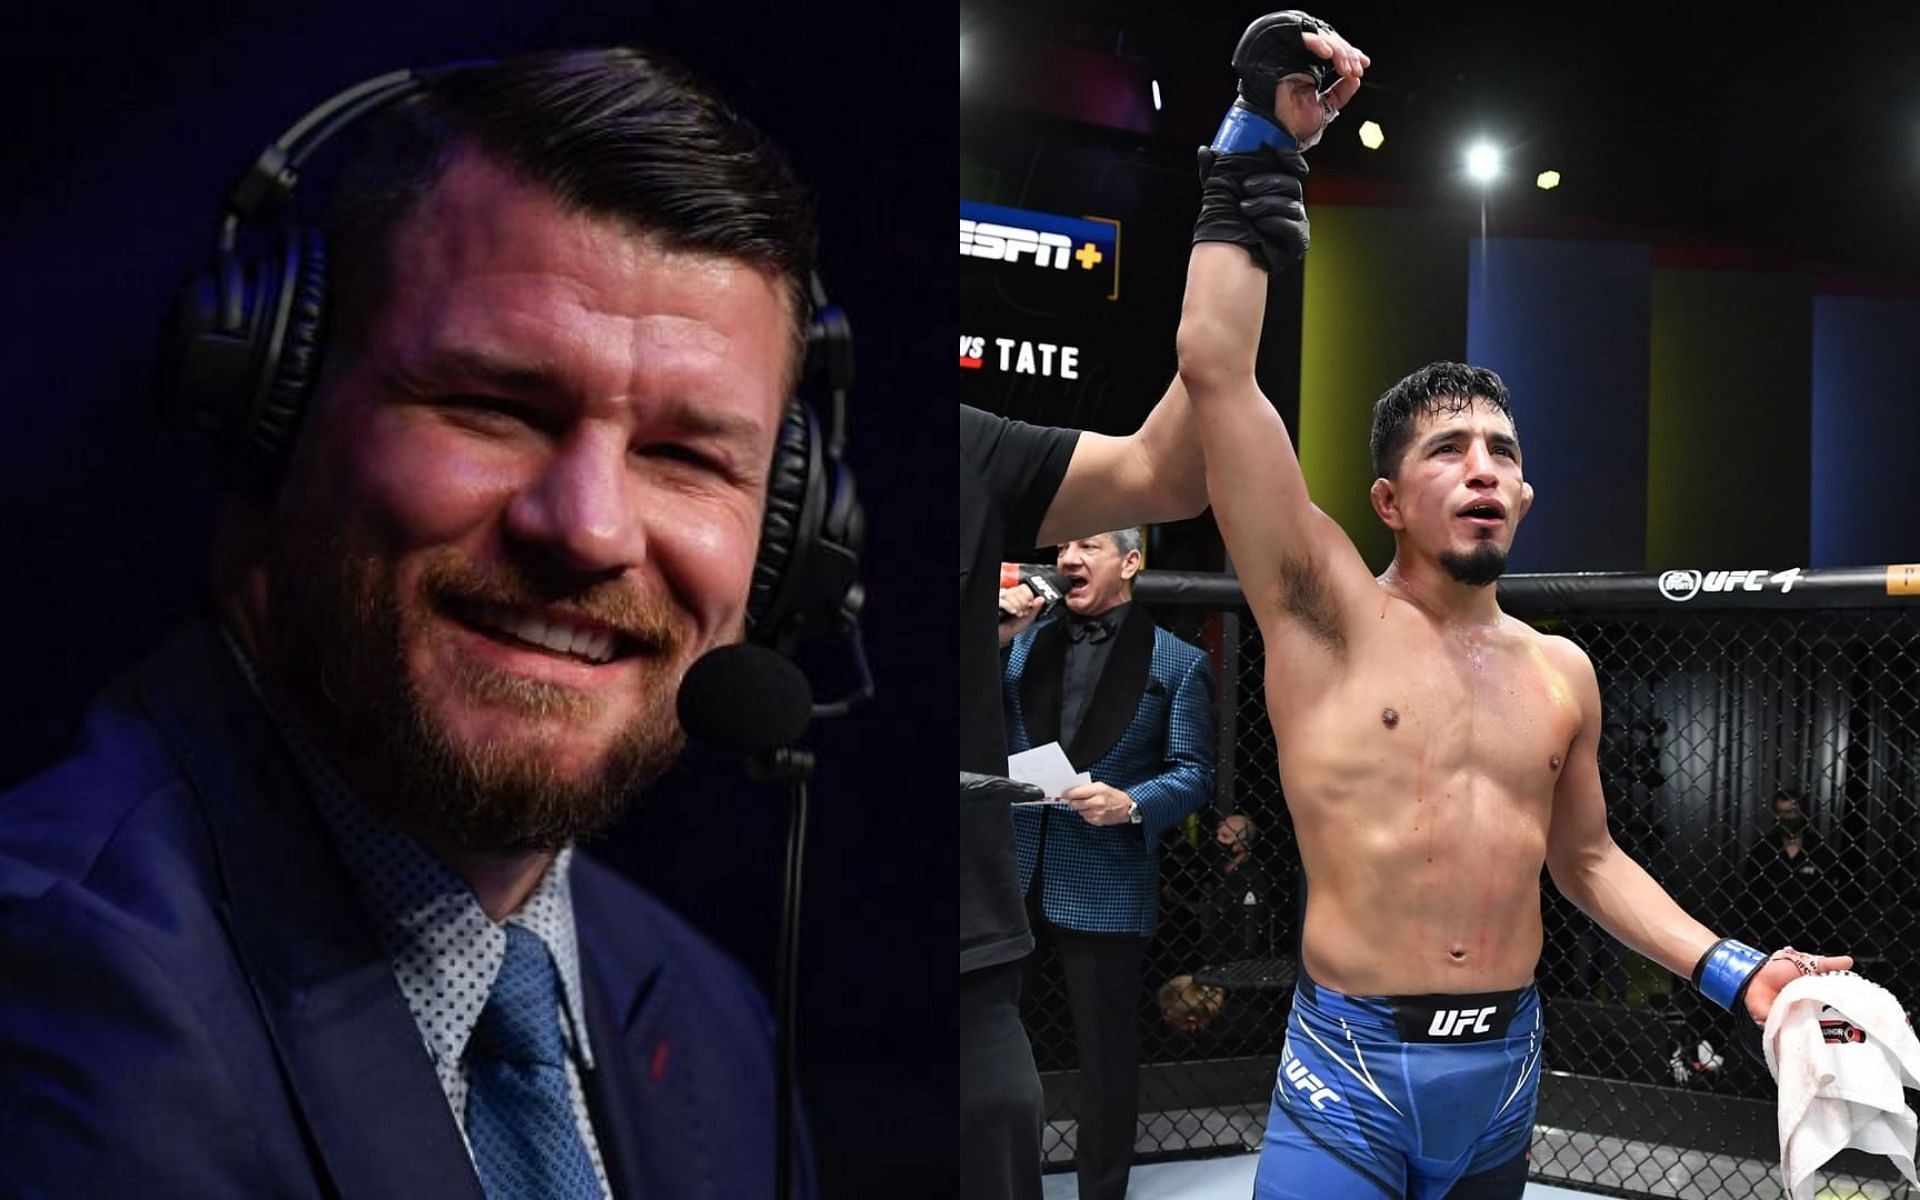 Michael Bisping (left) and Adrian Yanez (right) [Right photo via @ufc on Instagram]